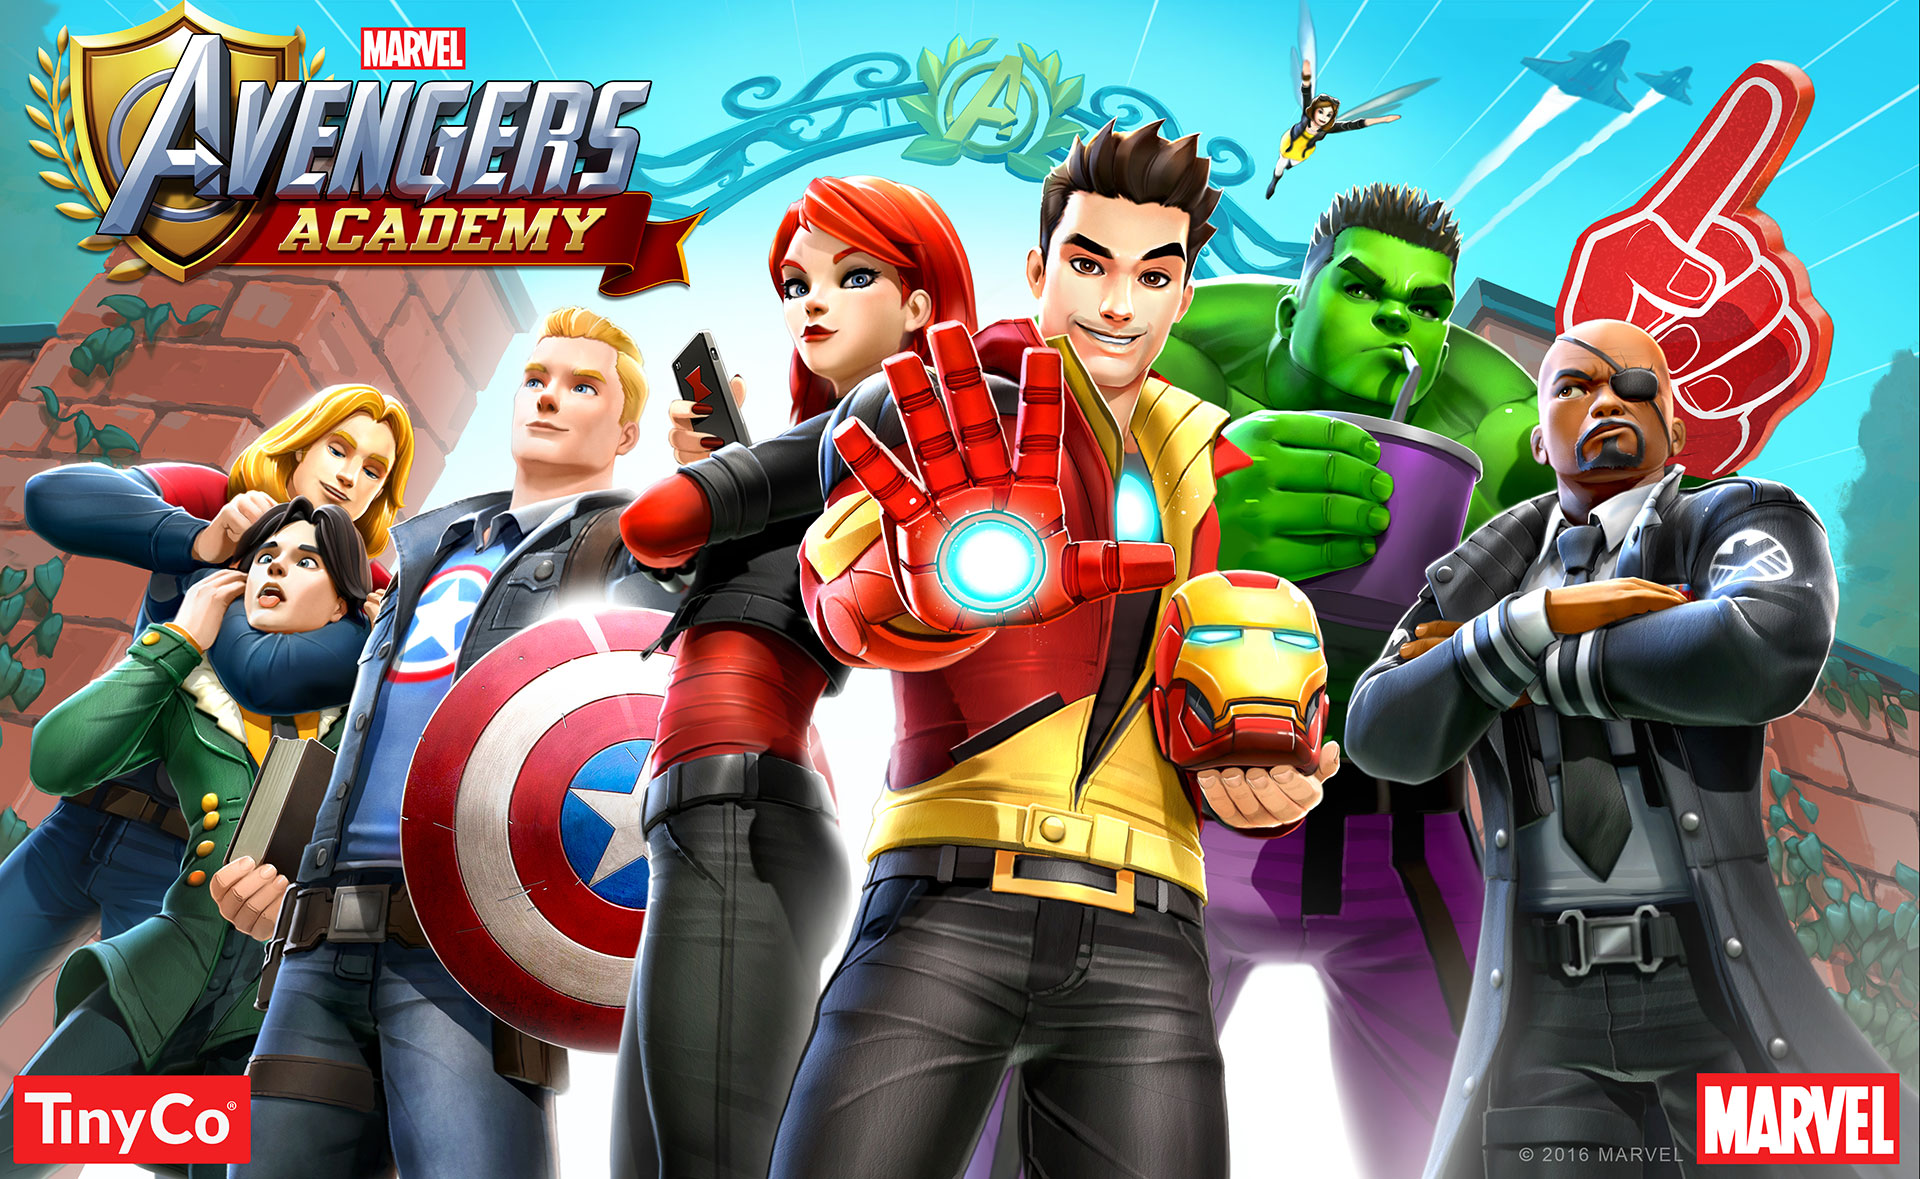 Marvel’s Latest Avengers Game Is Such A Shame